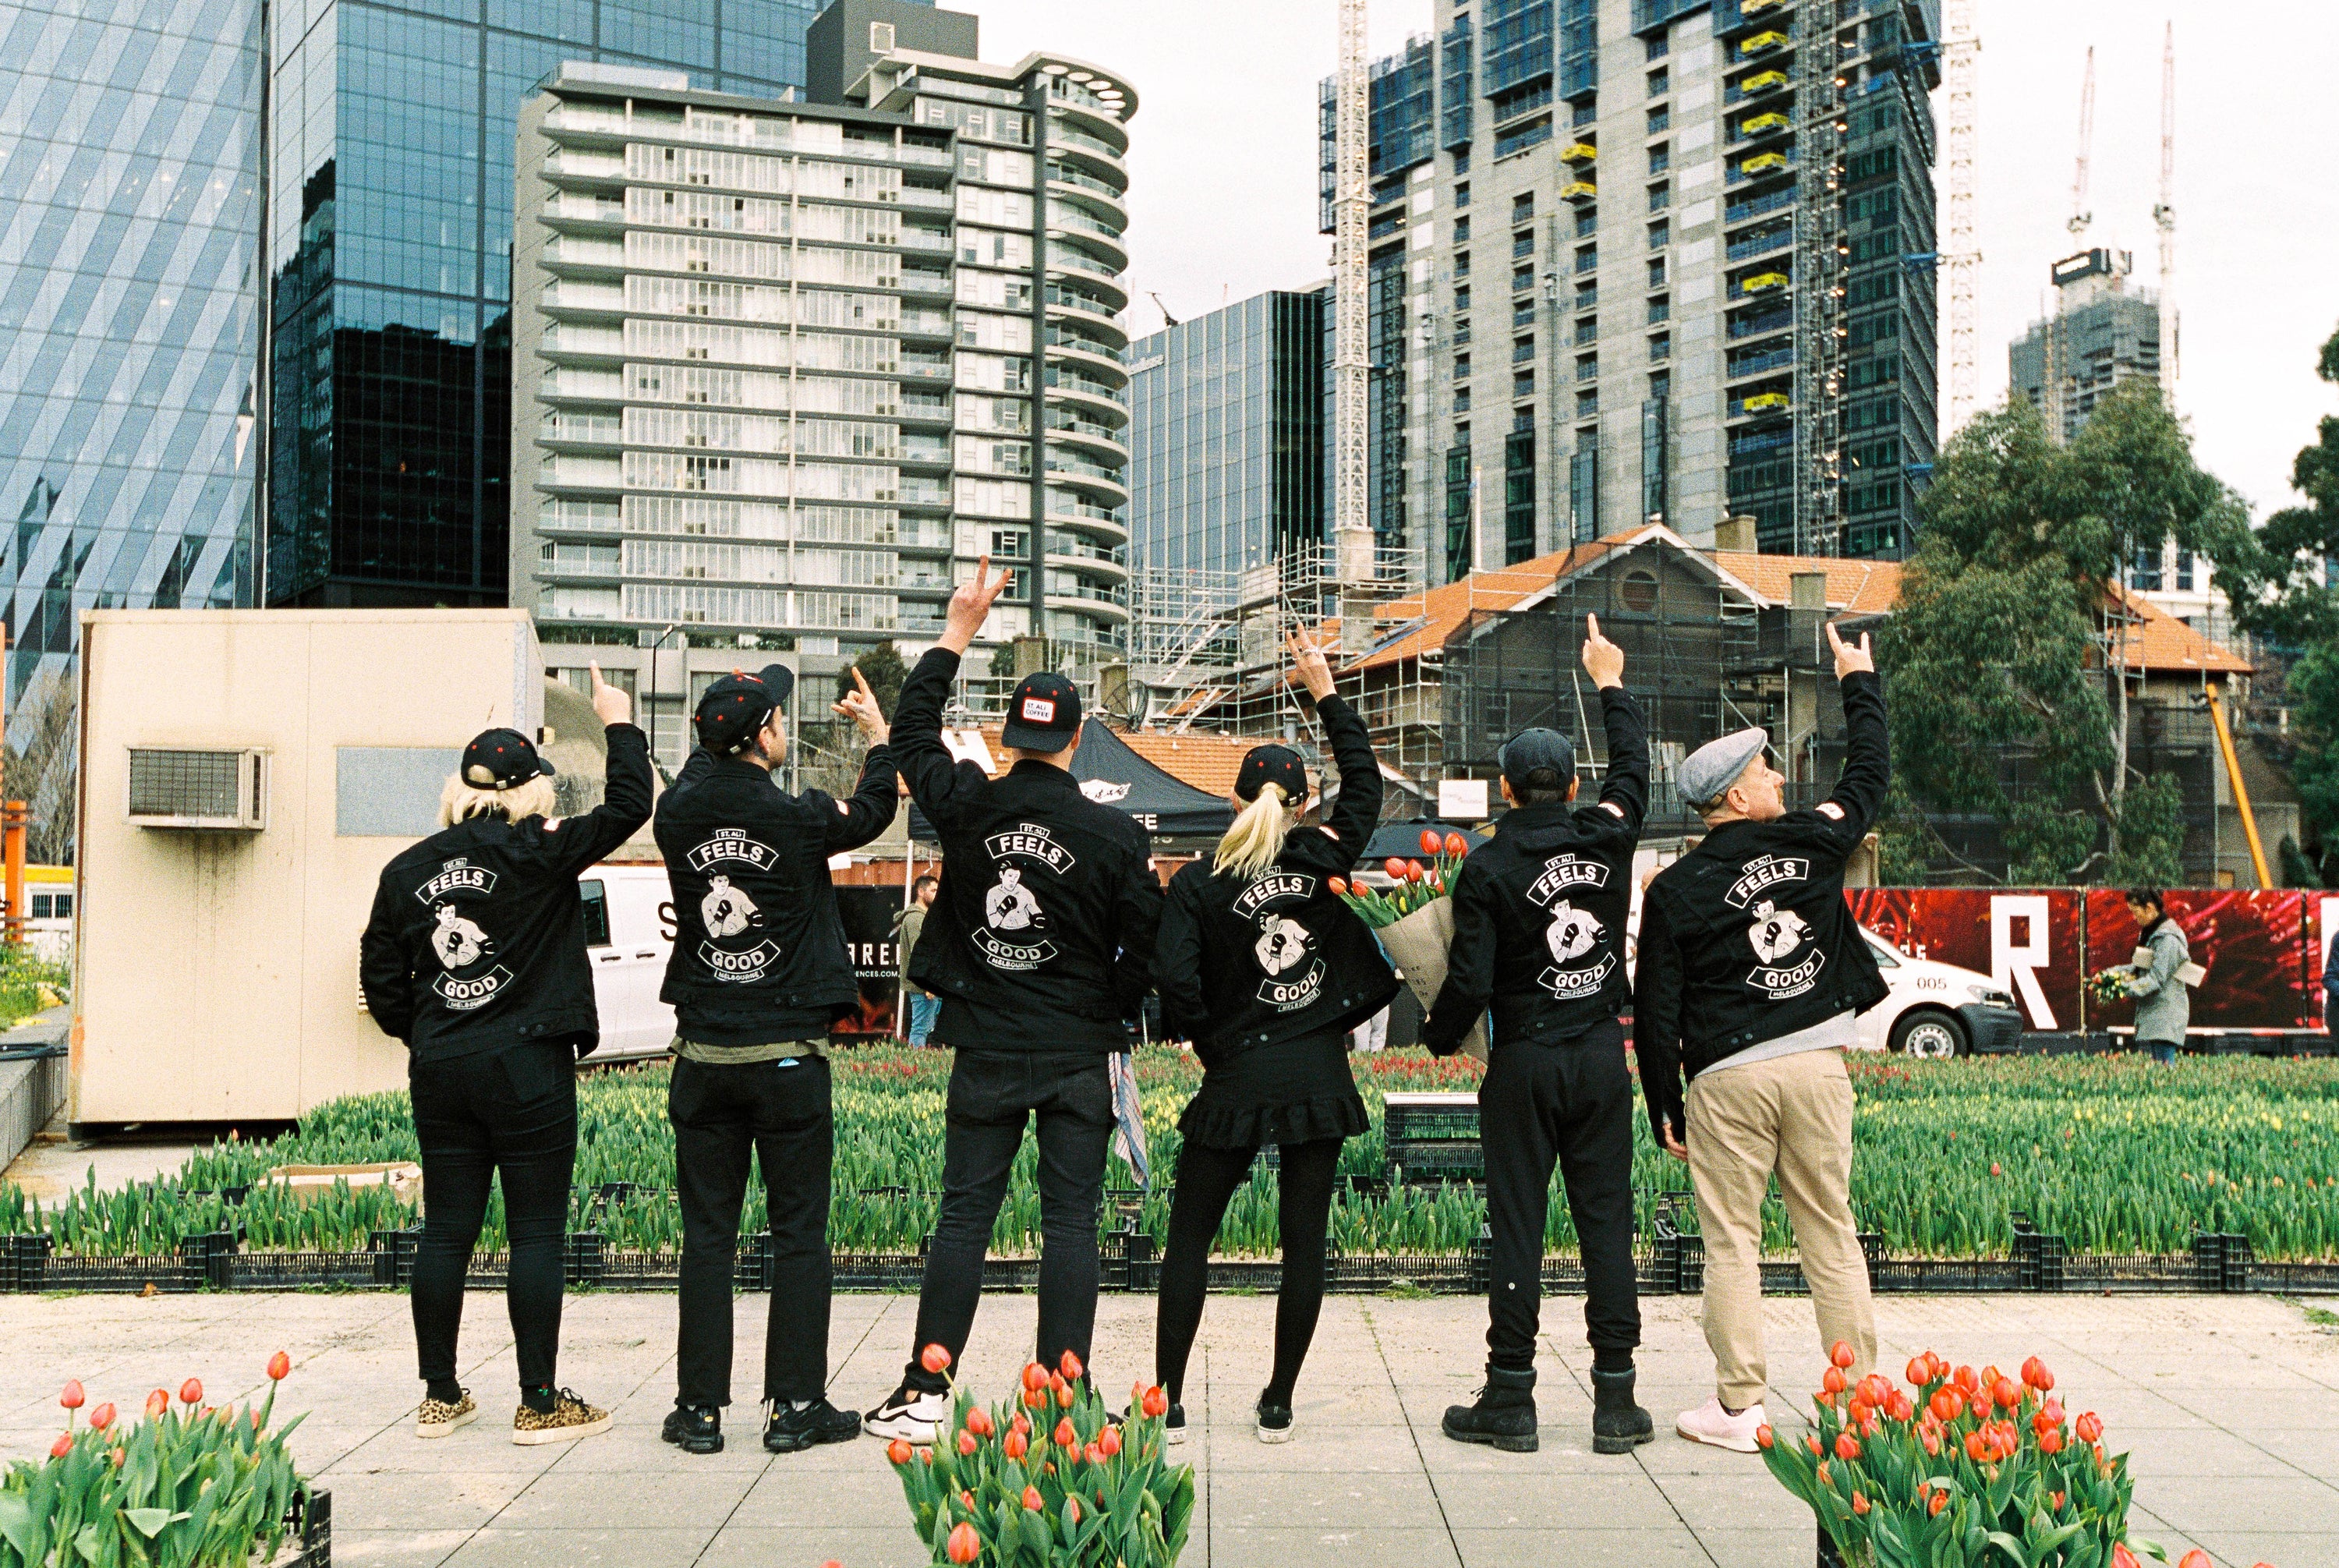 people gesturing while facing the city wearing black jackets